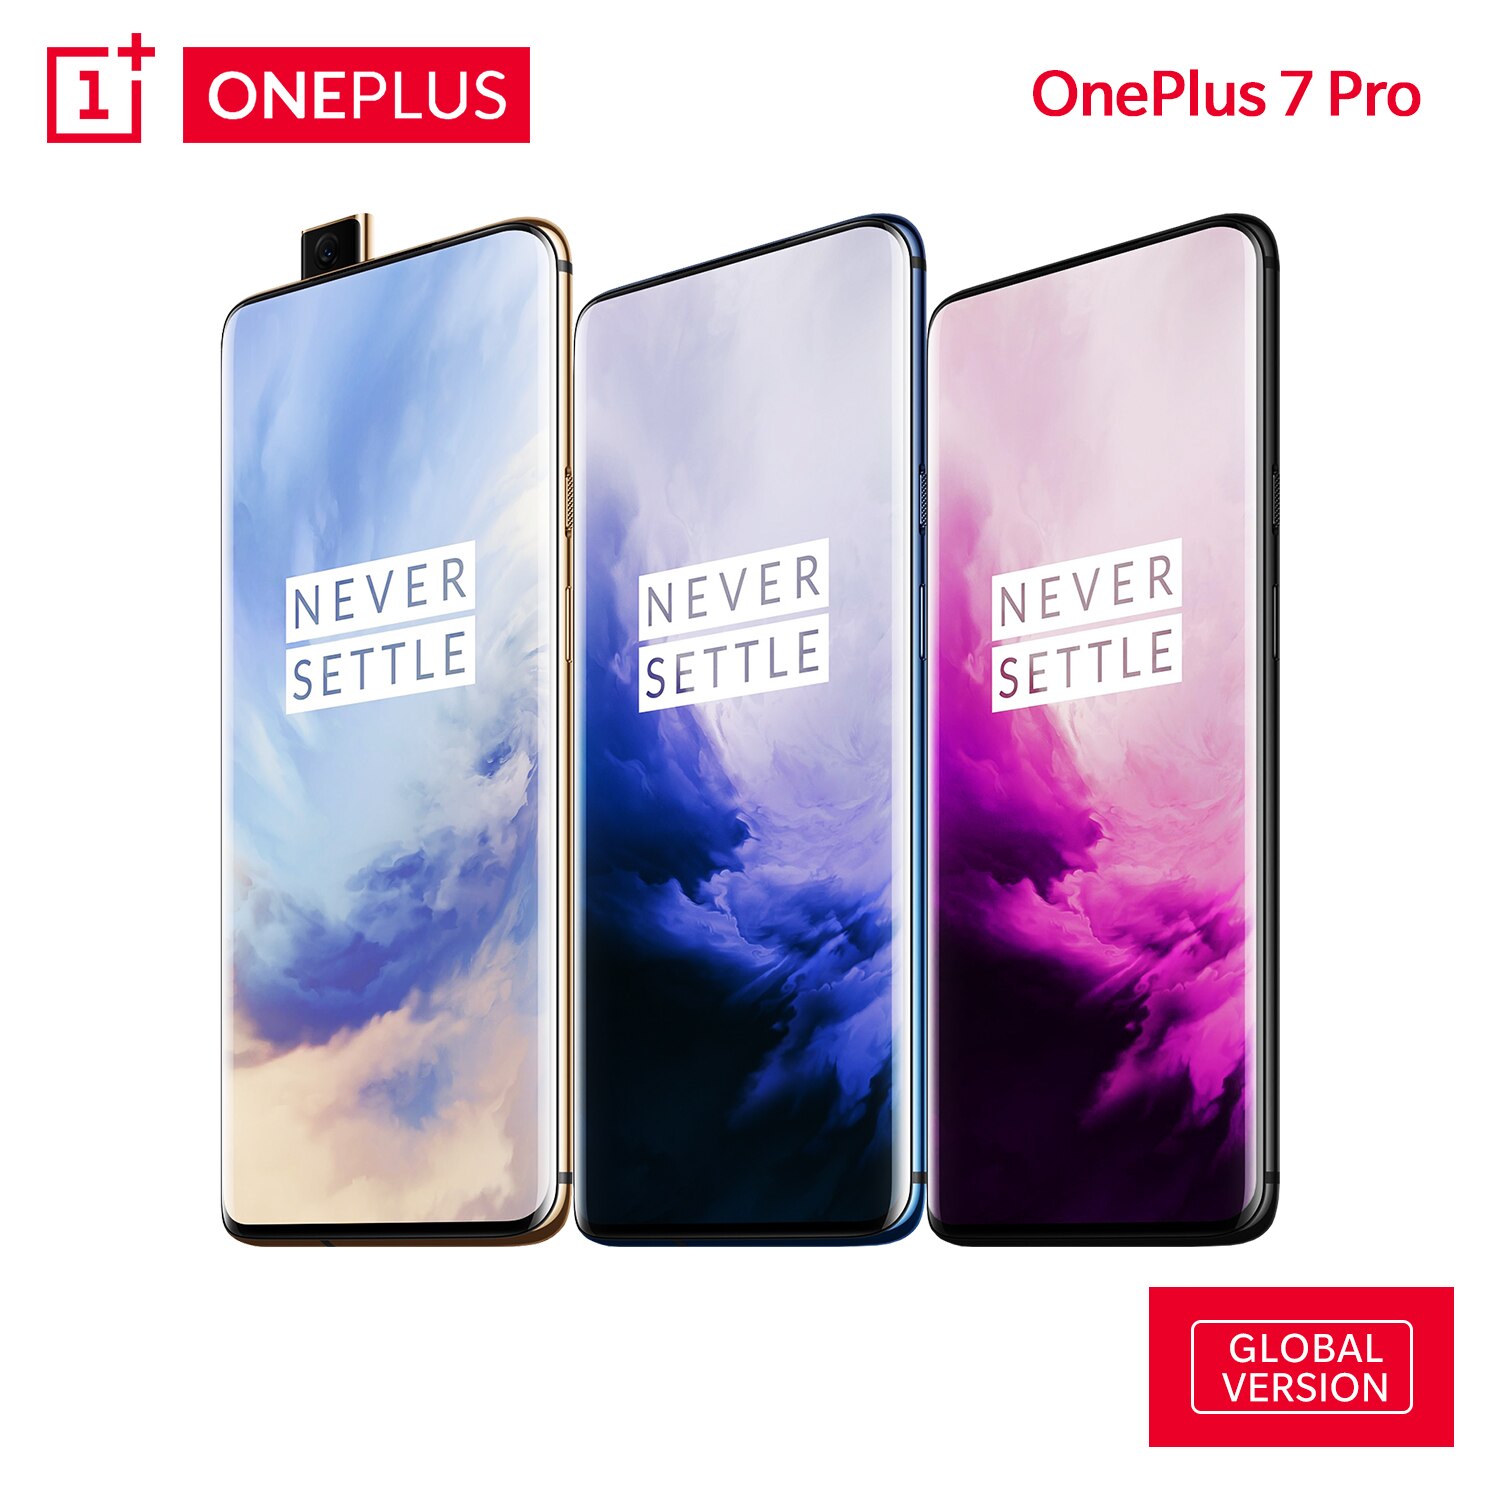 OnePlus 7 Pro Global Version Unlock Phone Smartphone 48 MP Camera Snapdragon 855 Octa Core Android Mobile UFS 3.0 NFC